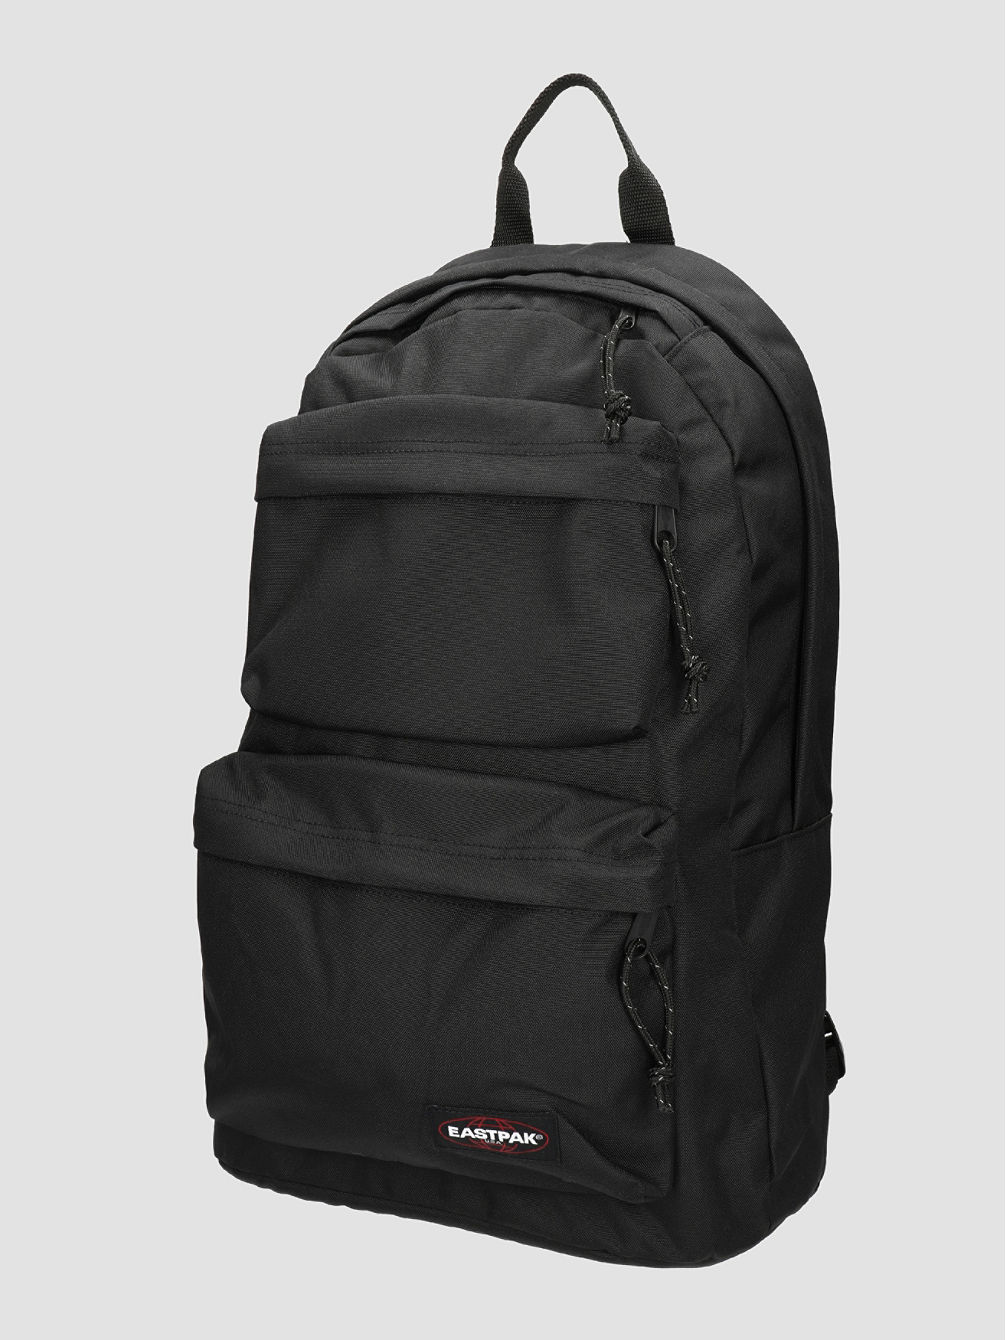 Padded Doubble Backpack